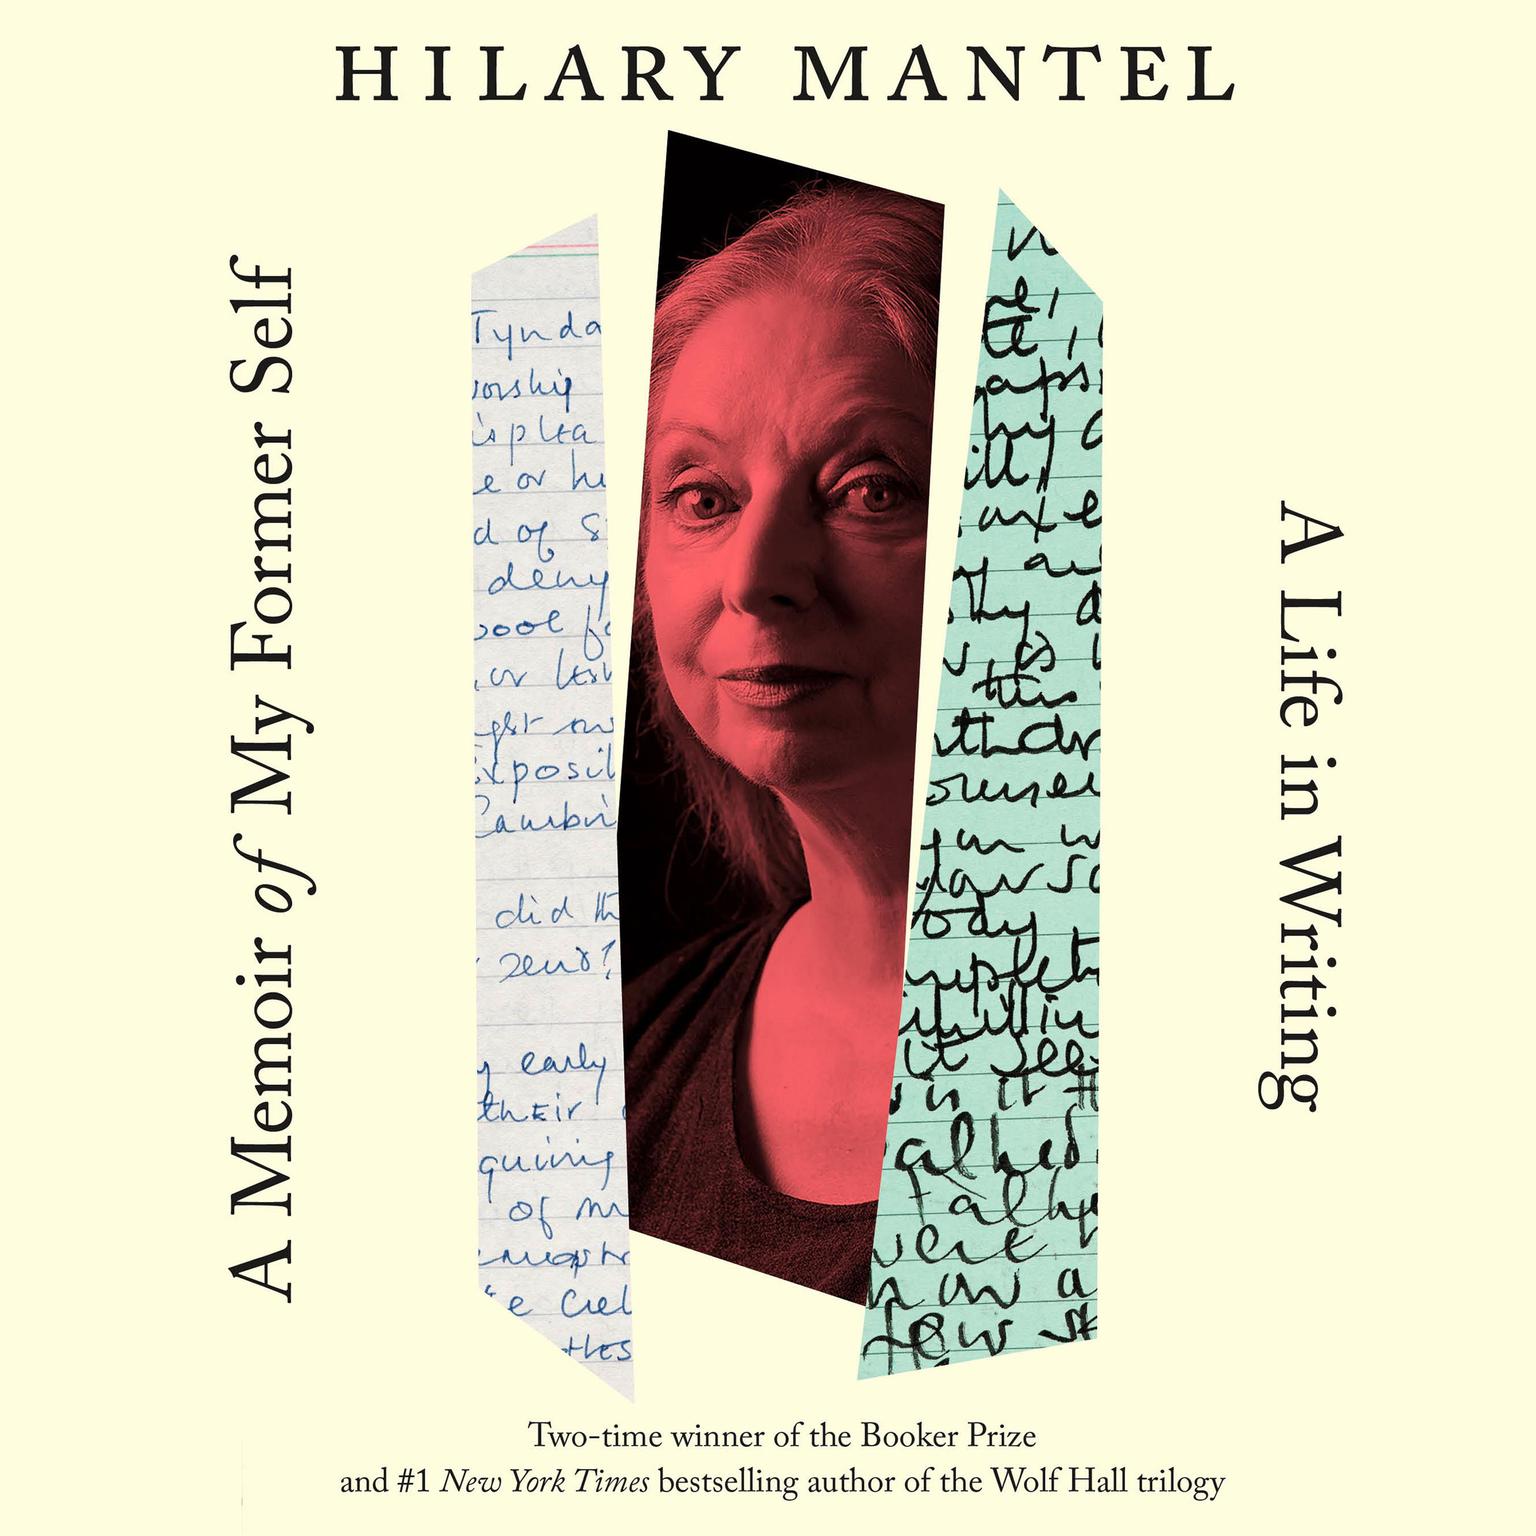 A Memoir of My Former Self: A Life in Writing Audiobook, by Hilary Mantel